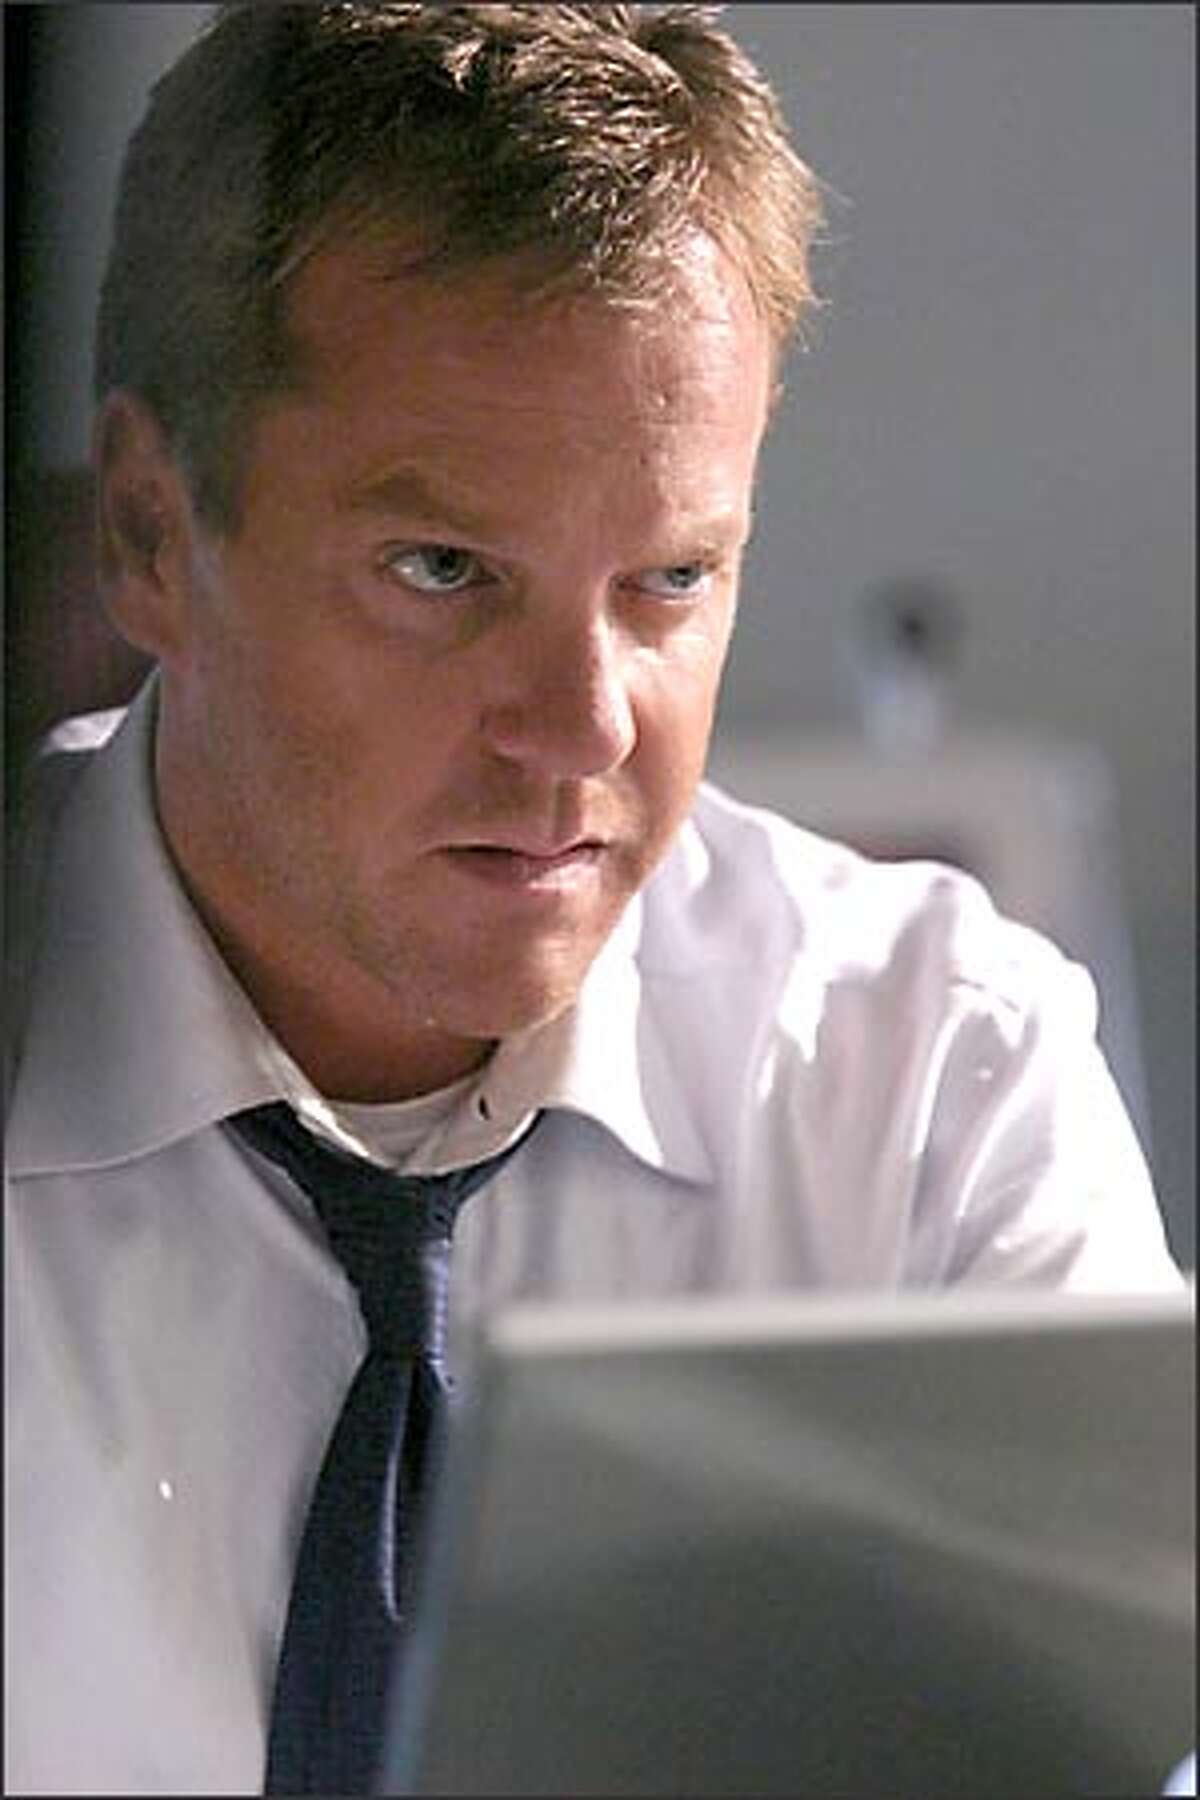 Veteran star player "24" now has Jack Bauer (Kiefer Sutherland) facing a formidable drug lord.